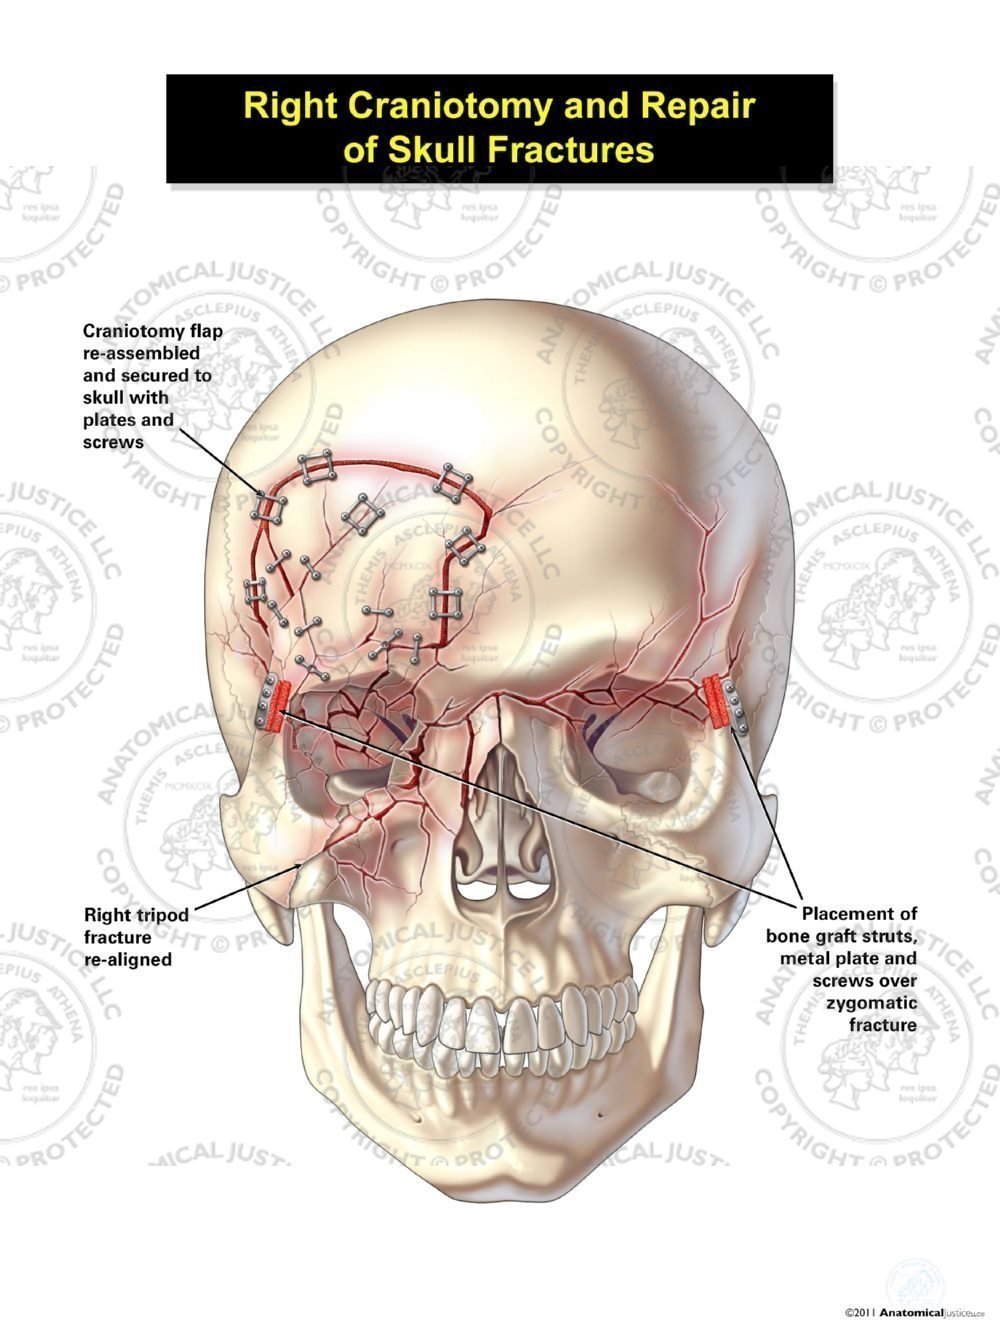 Right Craniotomy and Repair of Skull Fractures